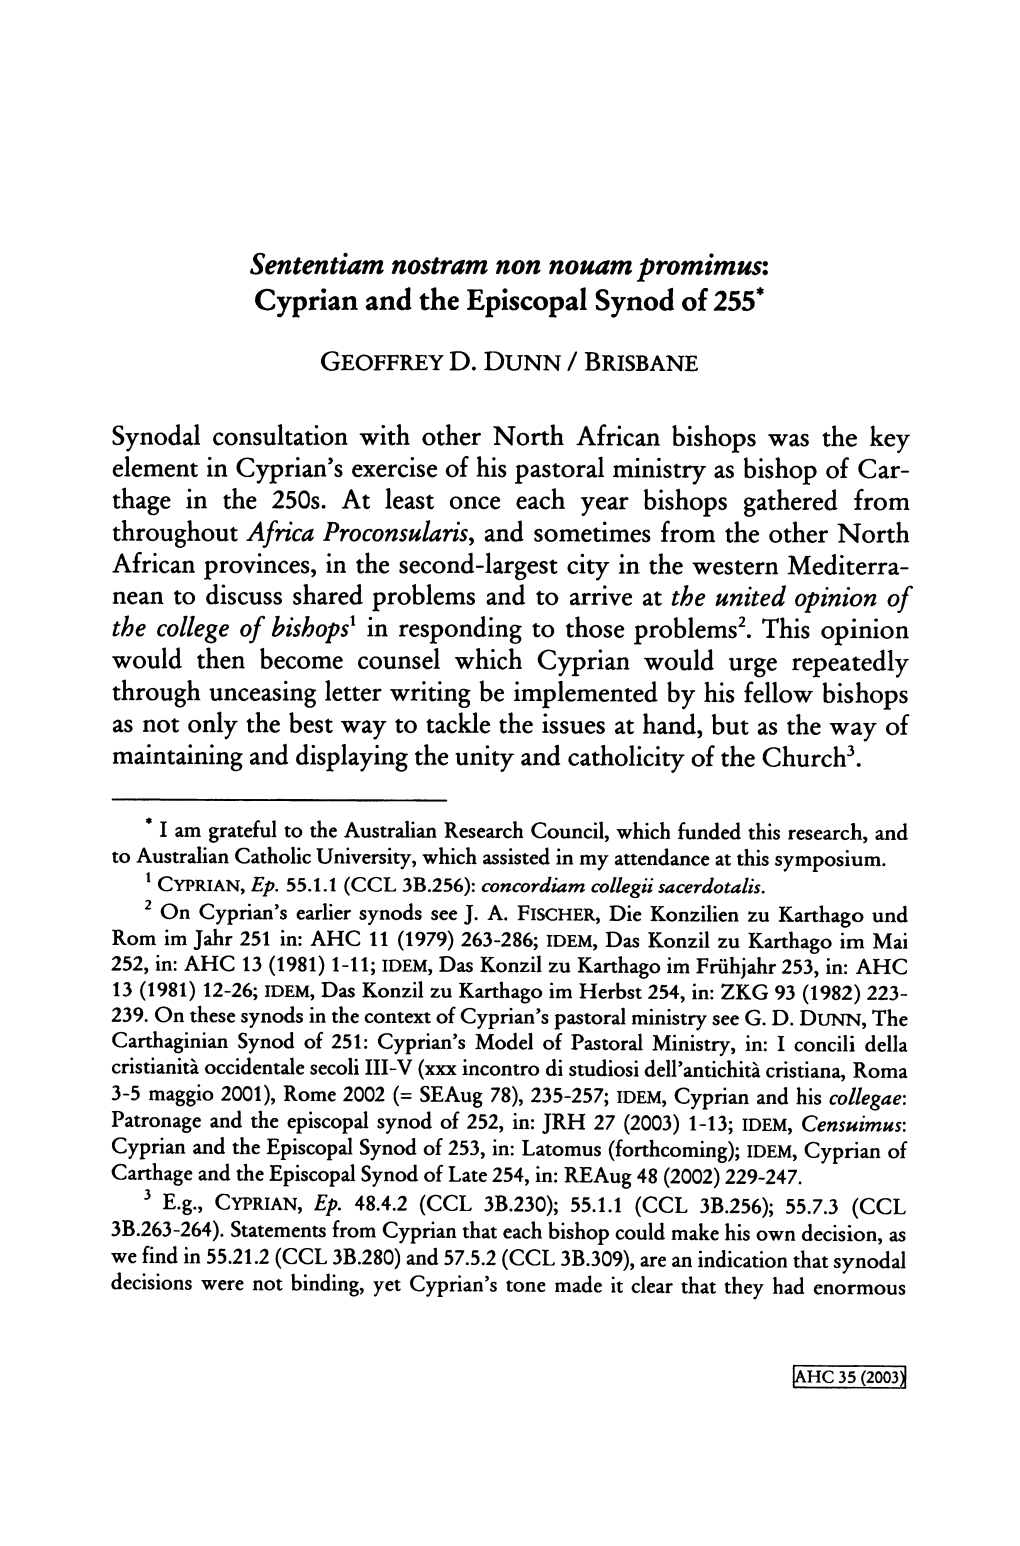 Sententiam Nostram Non Nouam Promimus: Cyprian and the Episcopal Synod of 255*